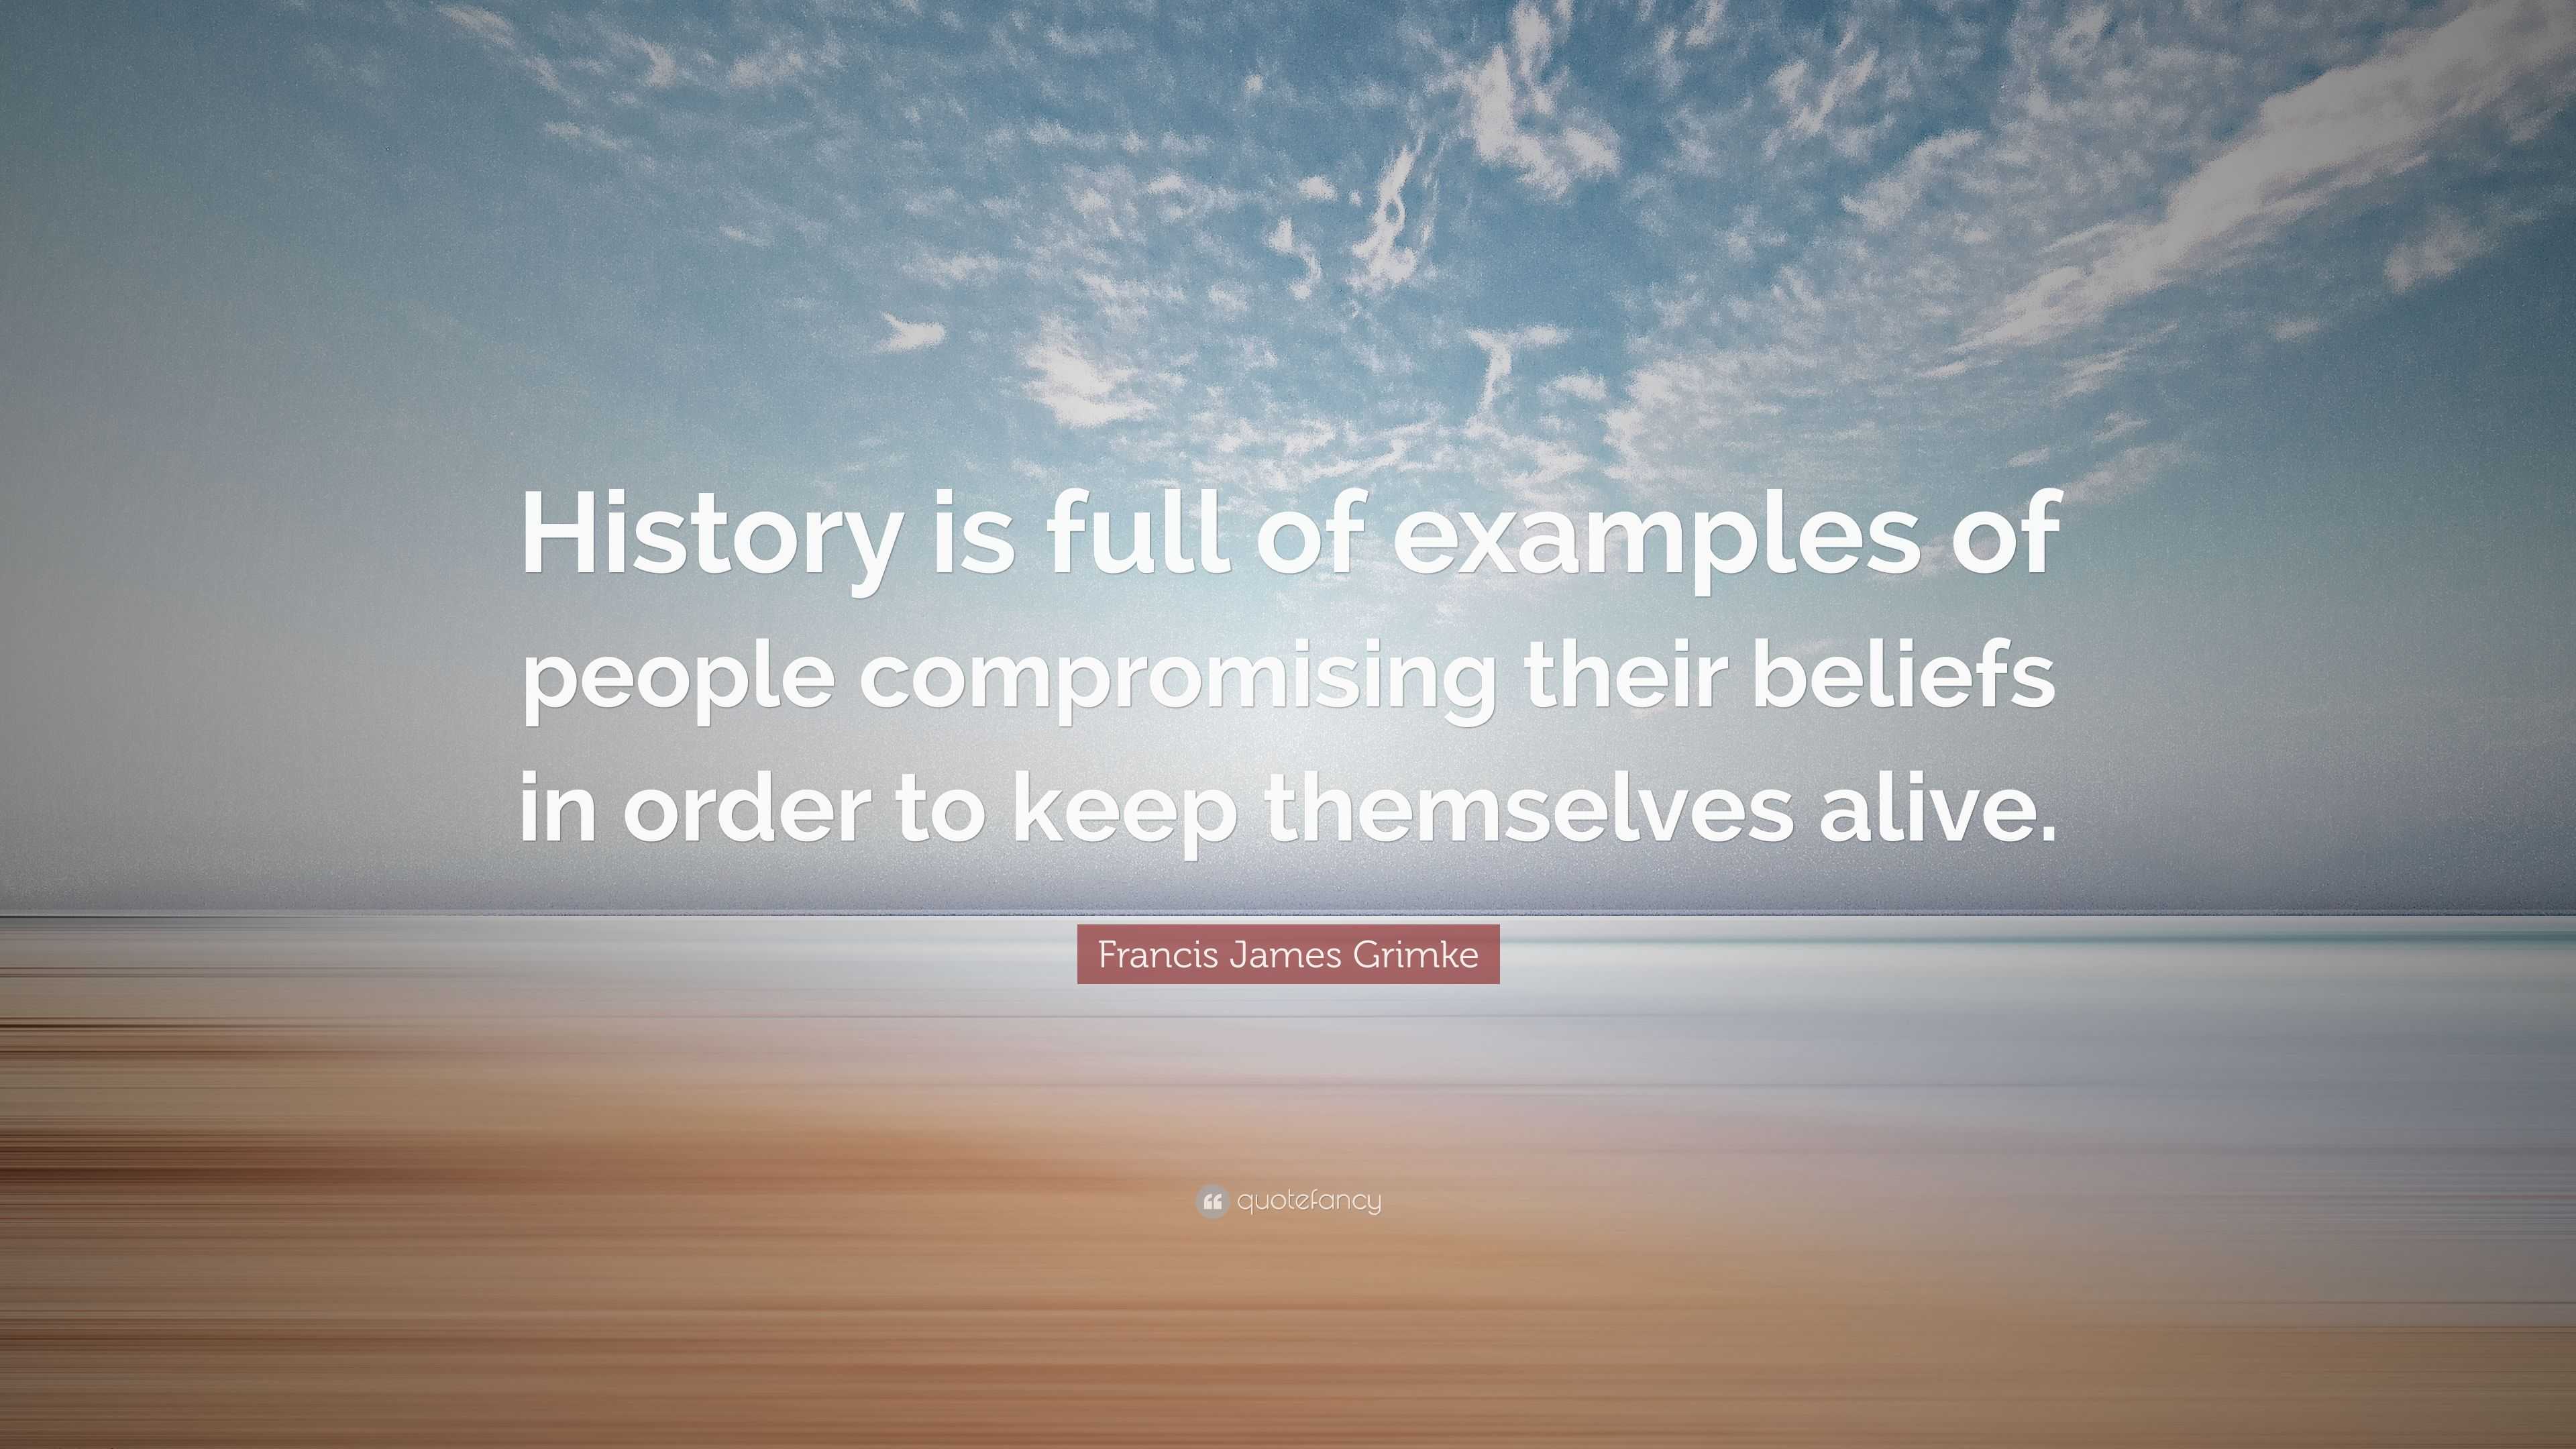 Francis James Grimke Quote: “History is full of examples of people ...